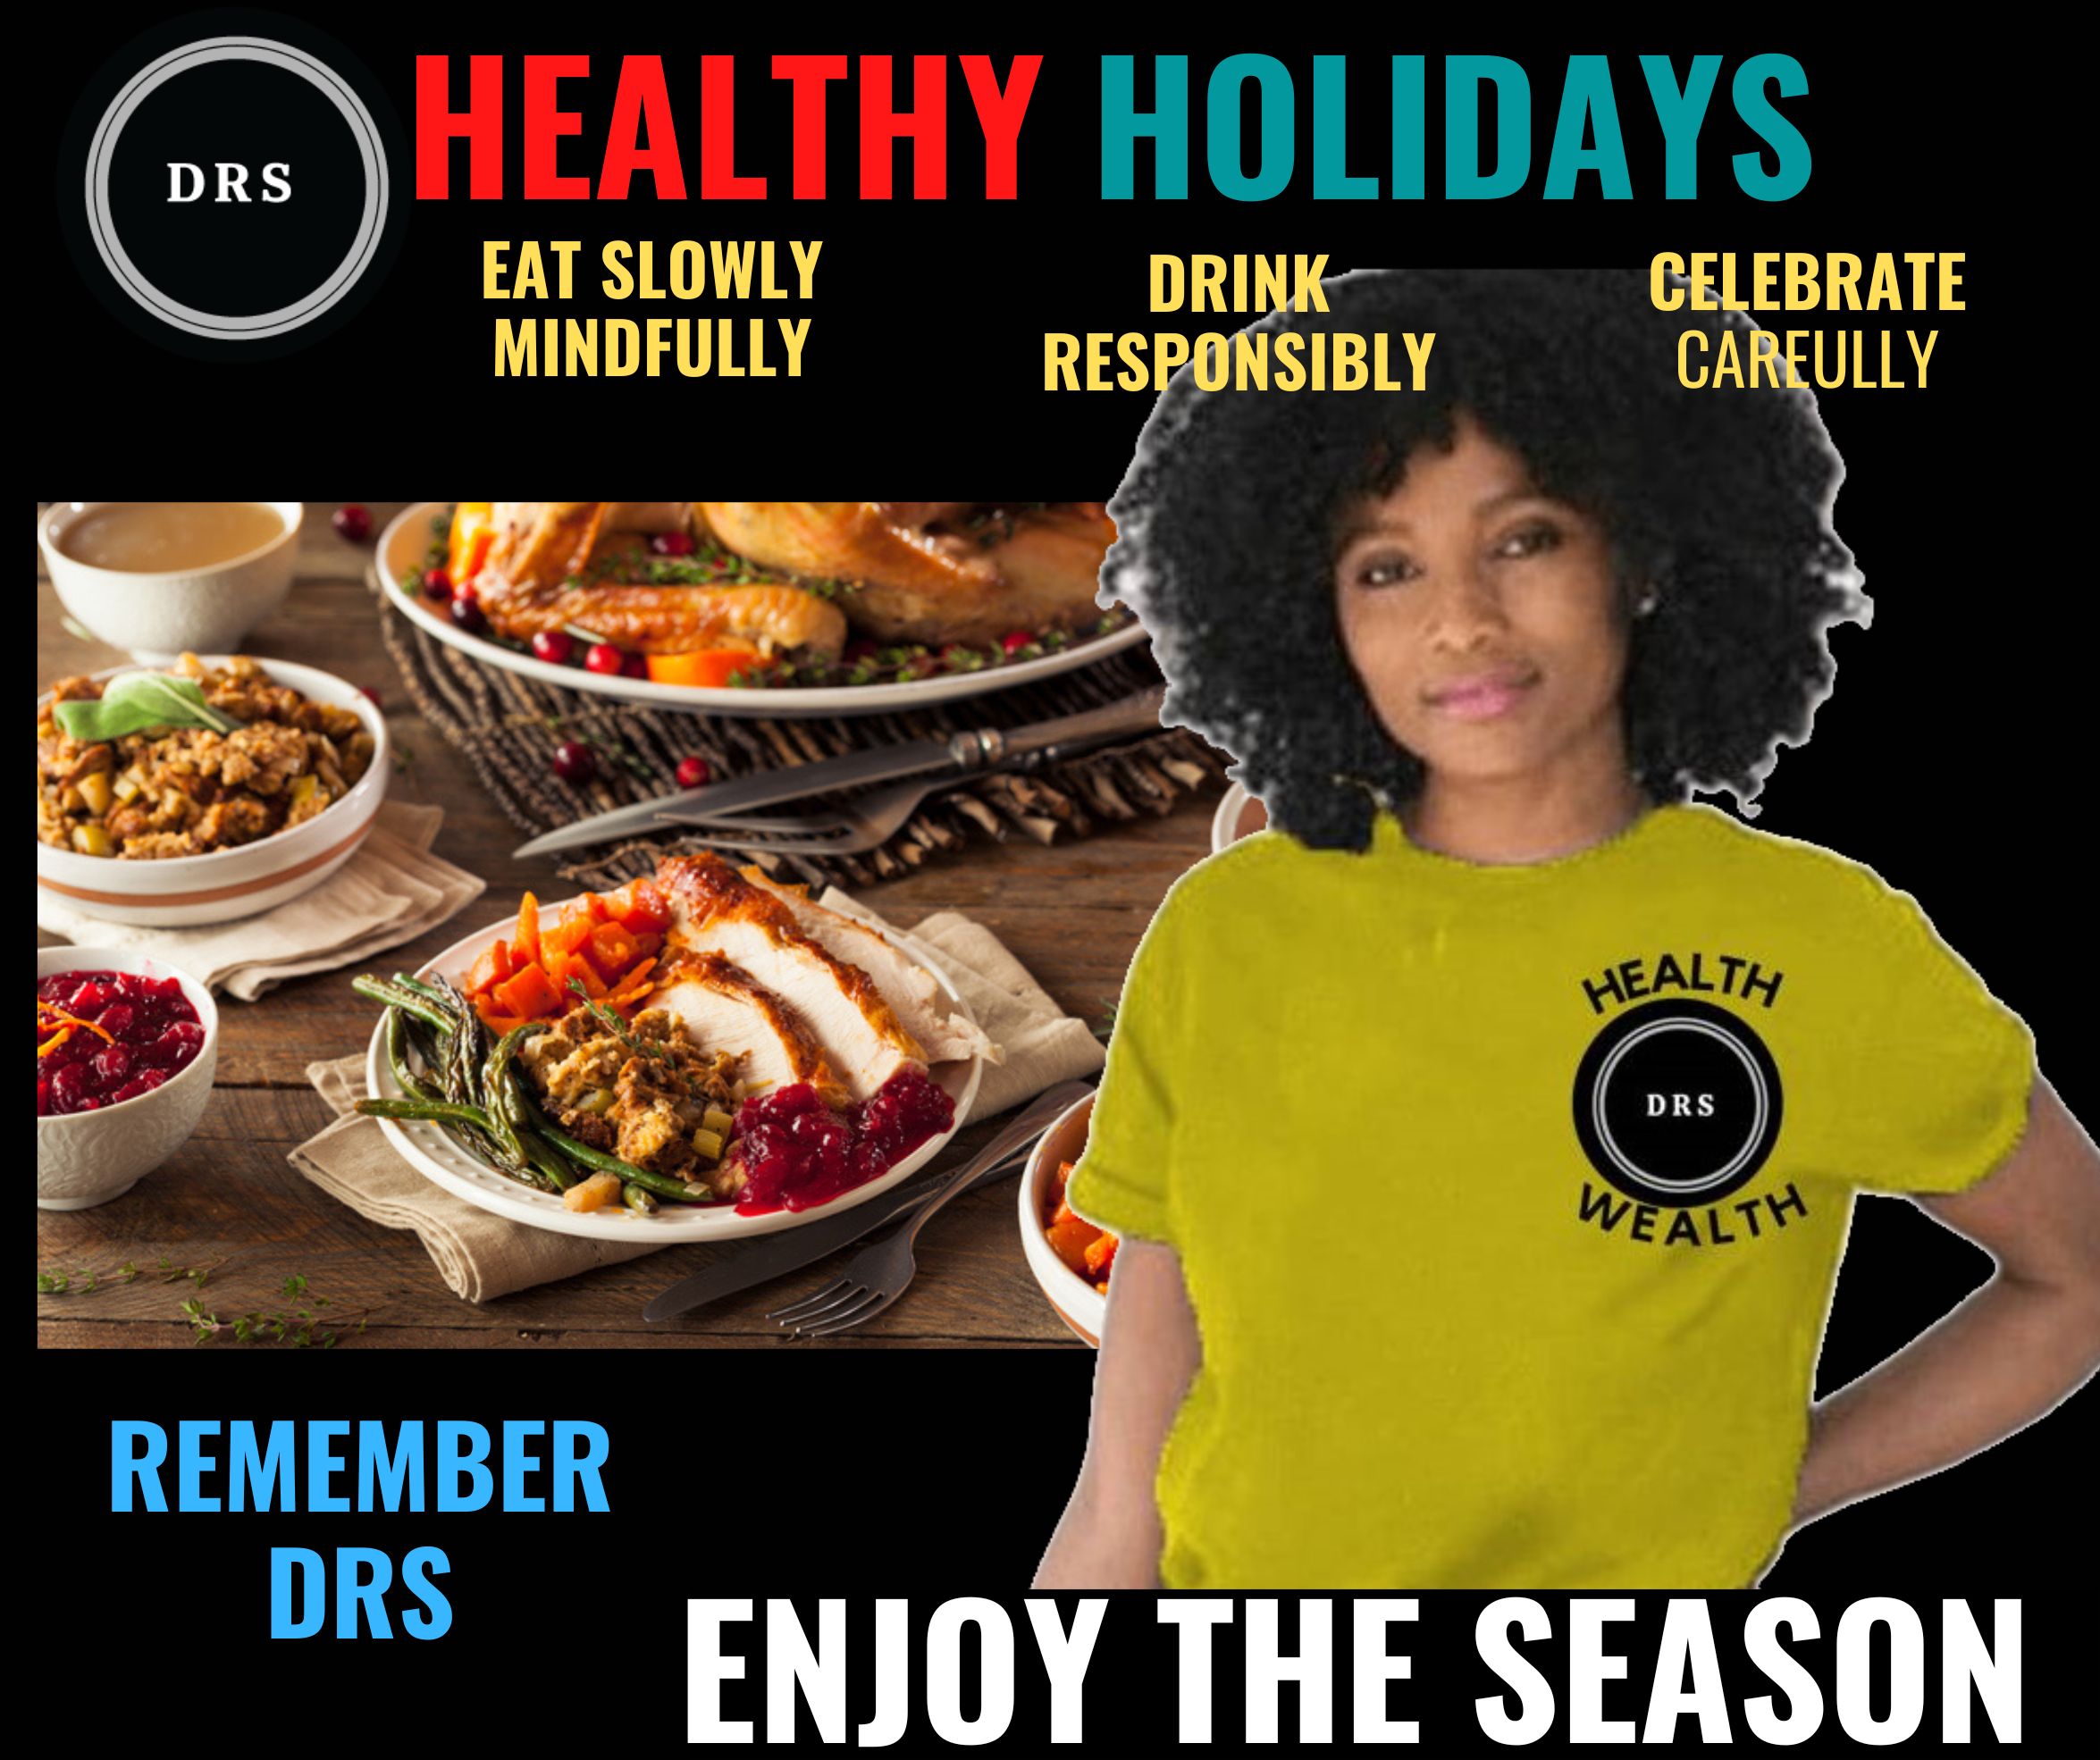 Healthy Action Plan for the Holidays